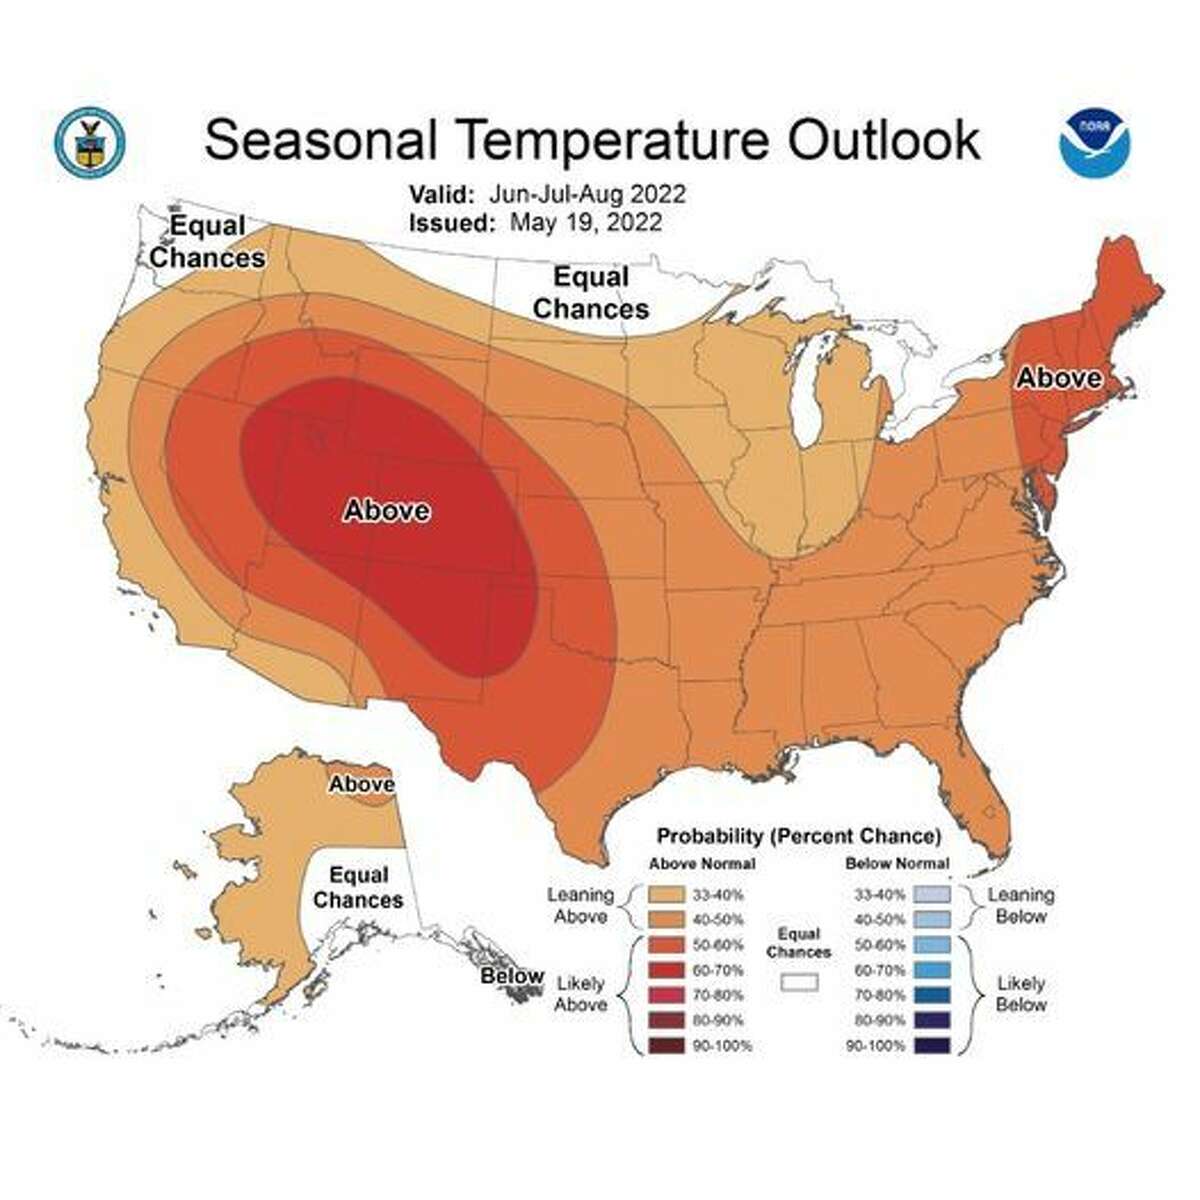 The National Weather Service is predicting slightly higher temperatures than usual this summer in Illinois.